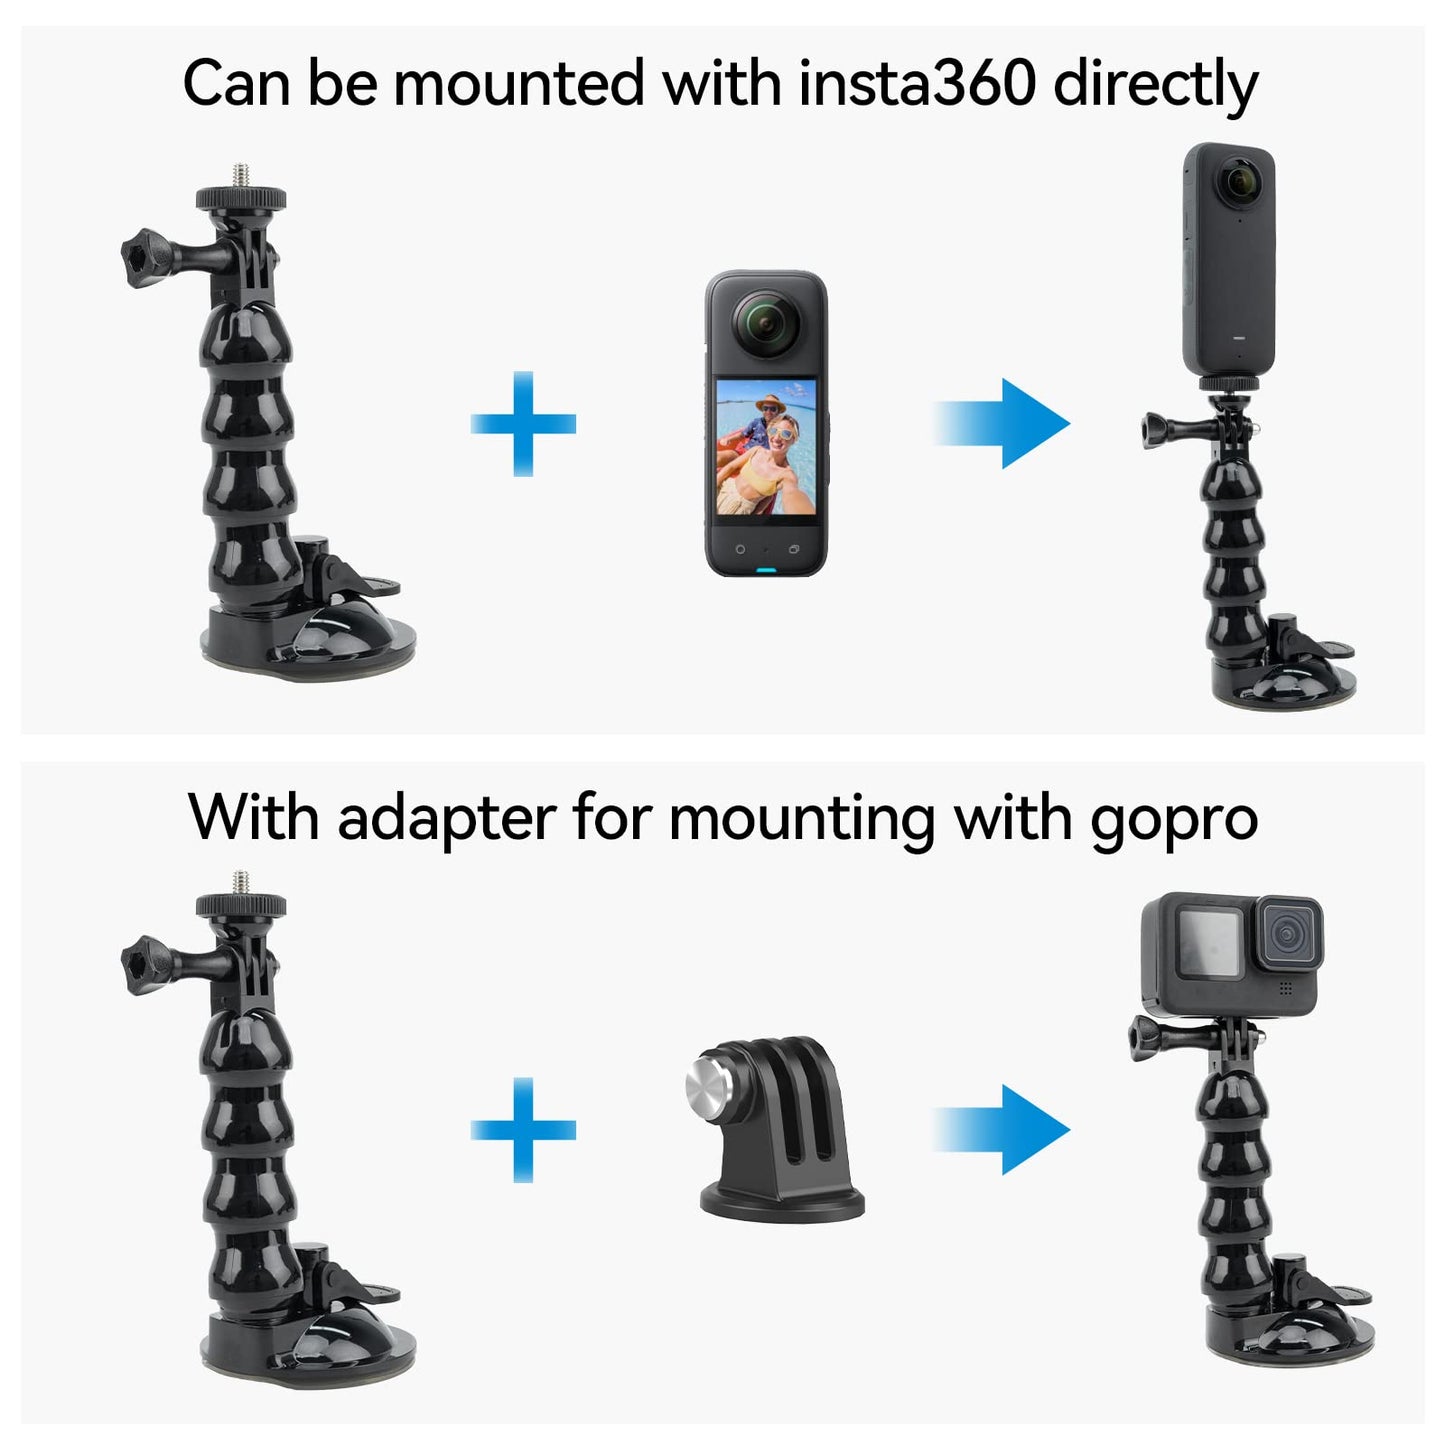 TELESIN Flexible Suction Car Mount for GoPro, iPhone, Android - 75mm Diameter